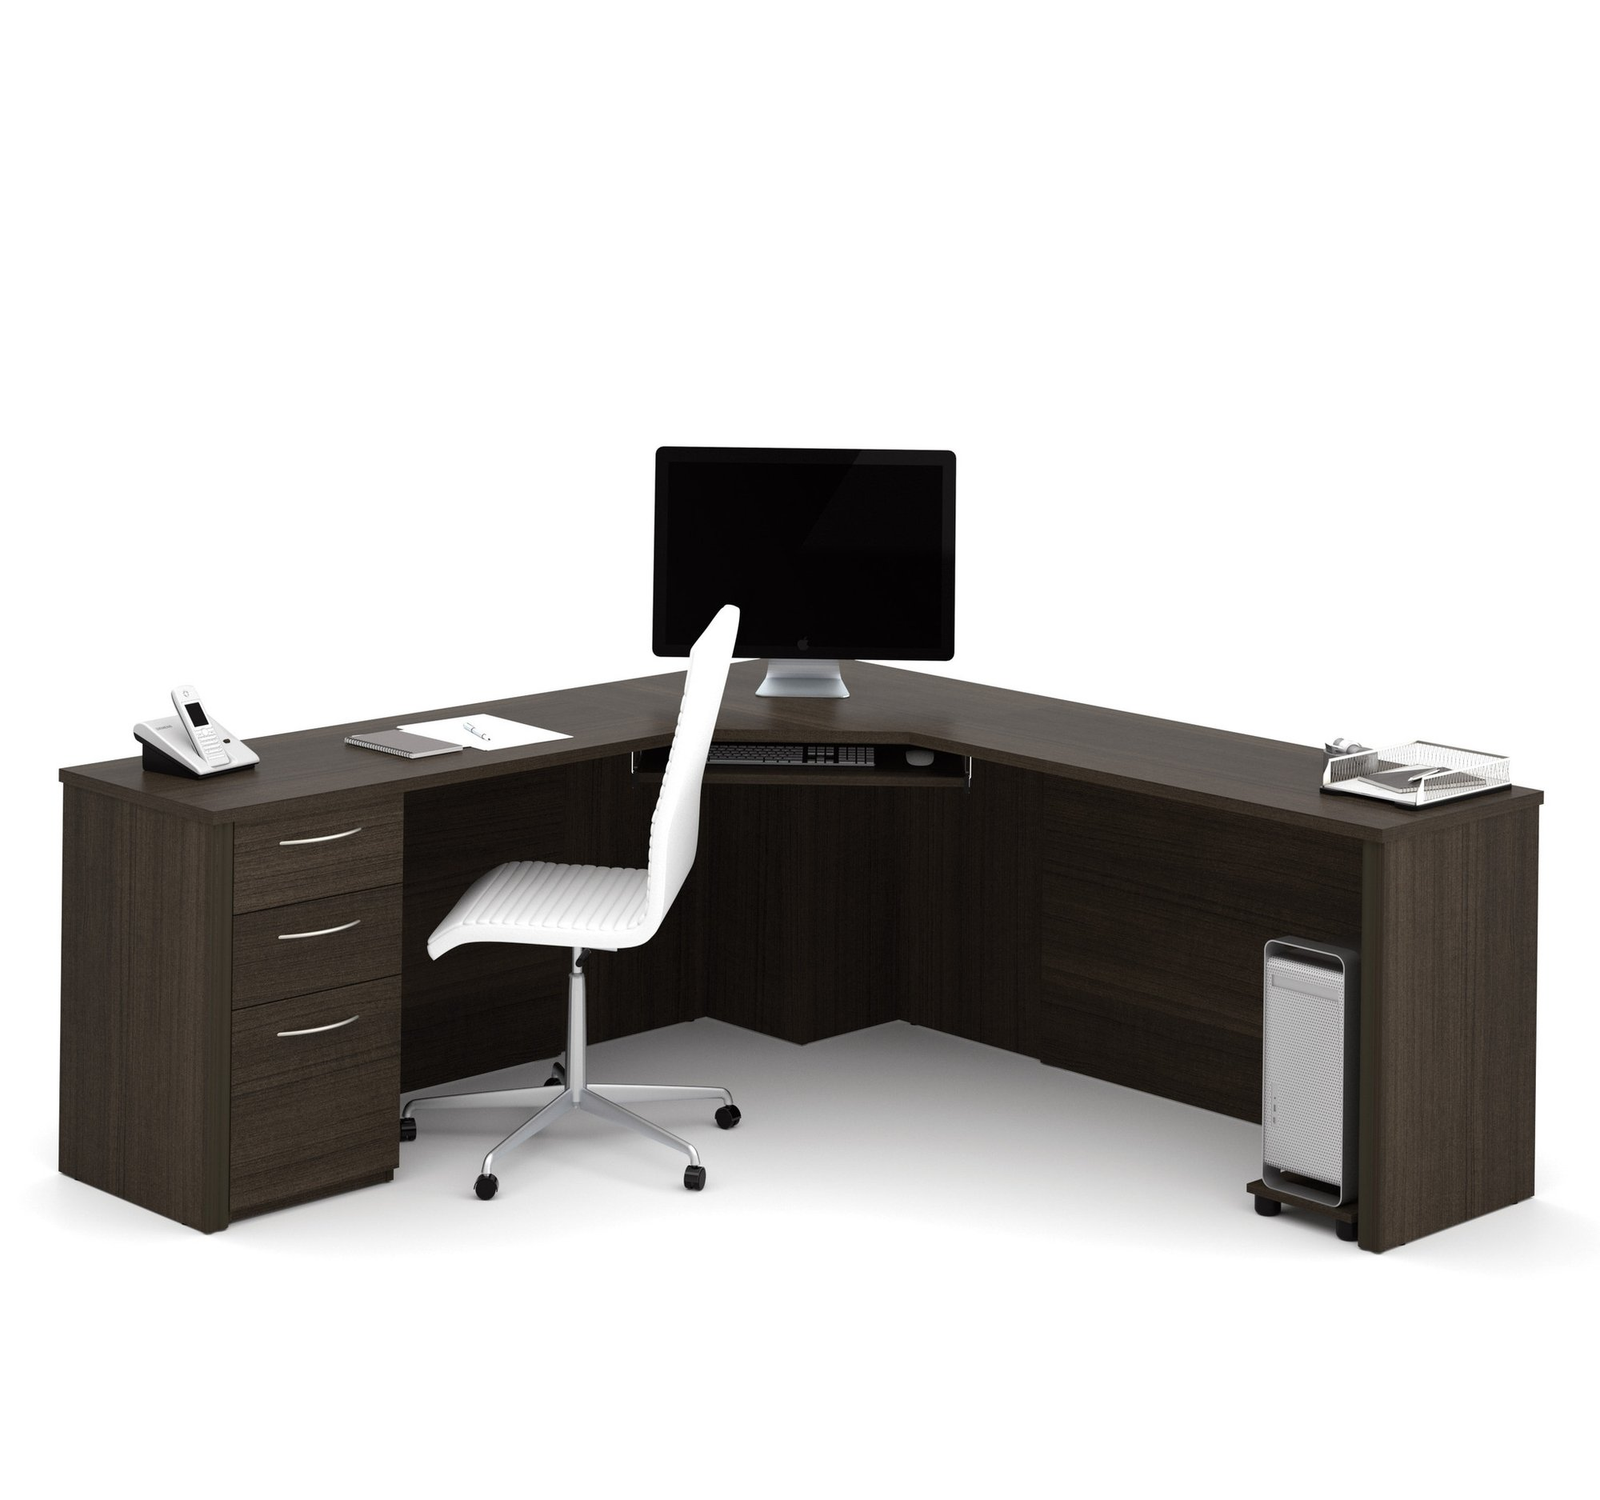 Benefits of purchasing a corner desk for your office